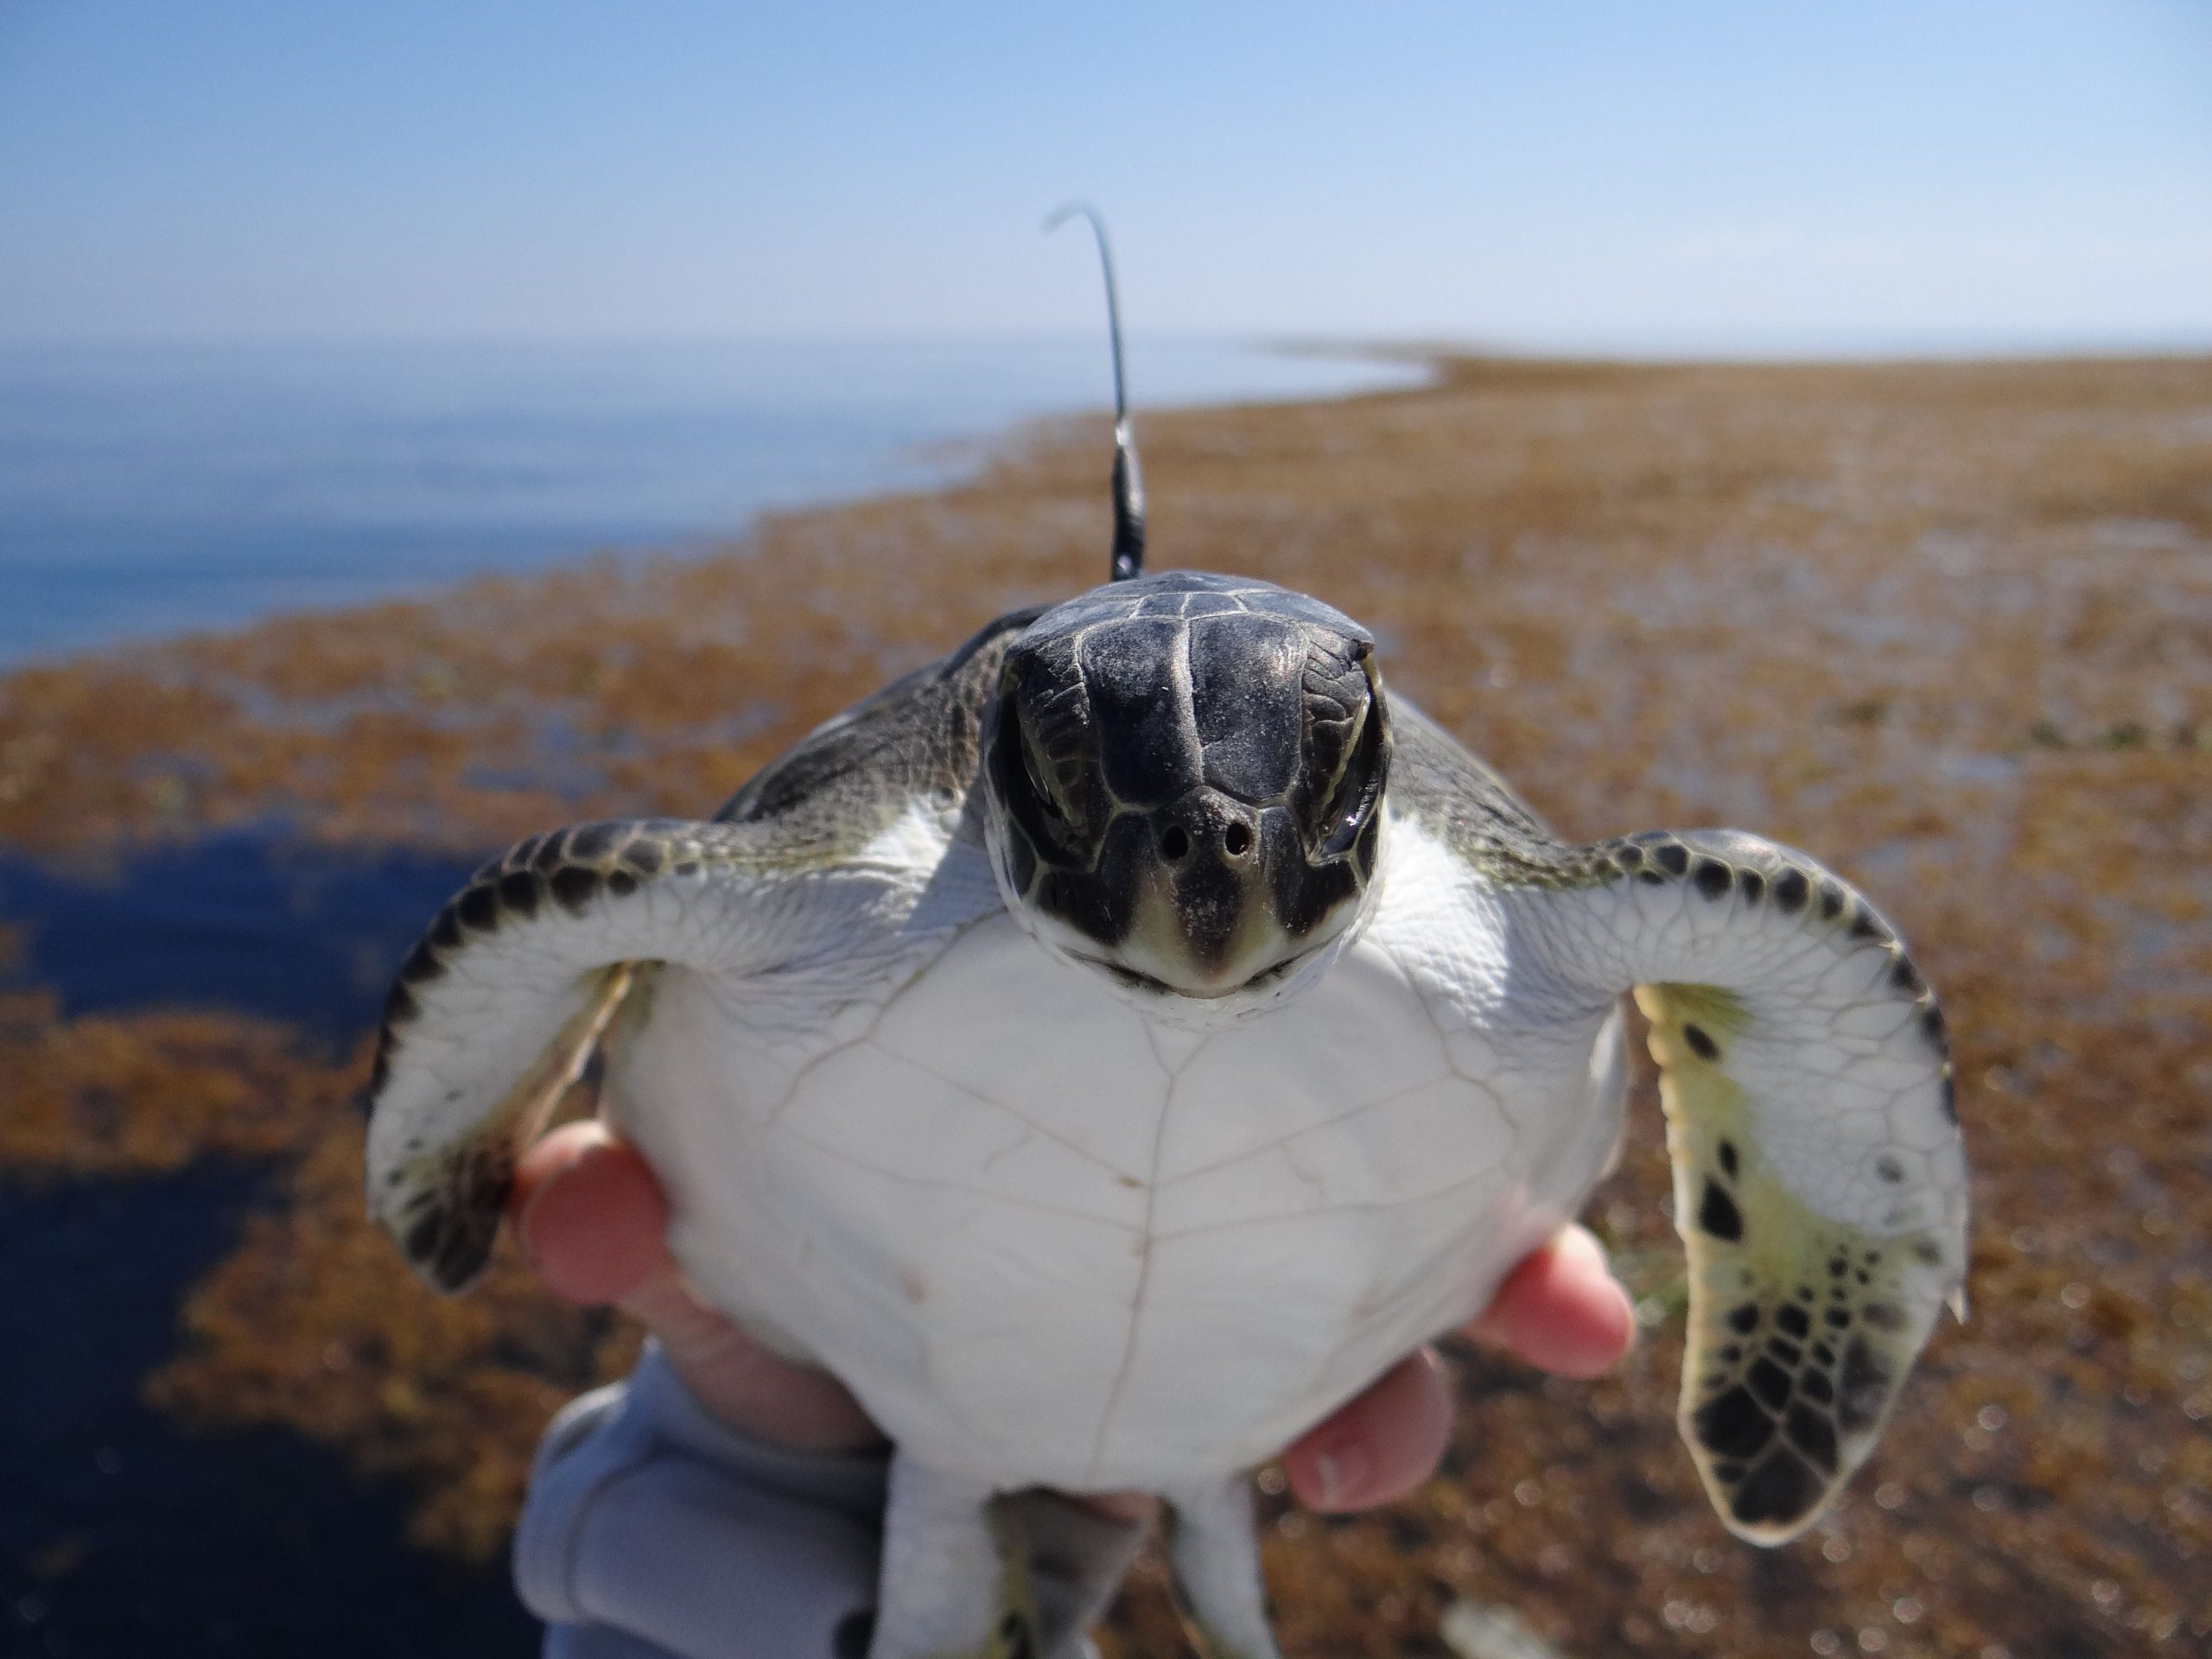 A turtle on a mission. Even if it doesn't know it. (Photo: Kate Mansfield, UCF MTRG; Permit number NMFS - 19508.)